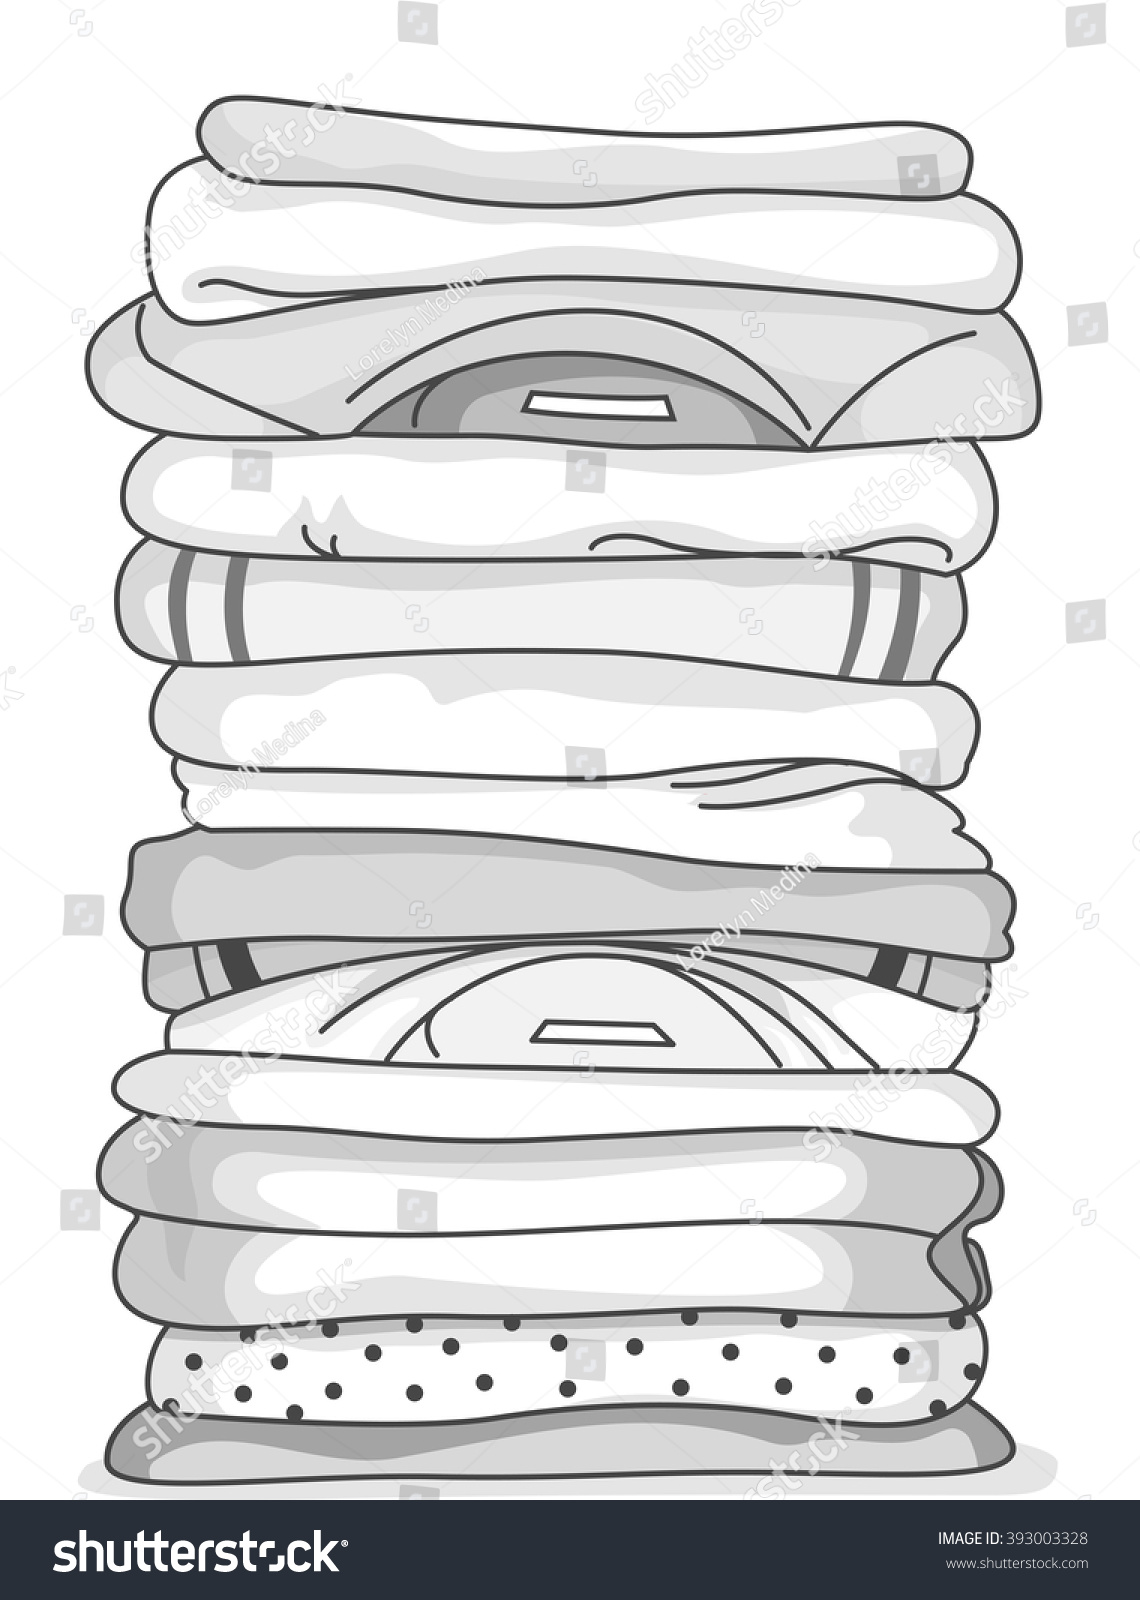 Black And White Illustration Of A Stack Of Folded Clothes 393003328